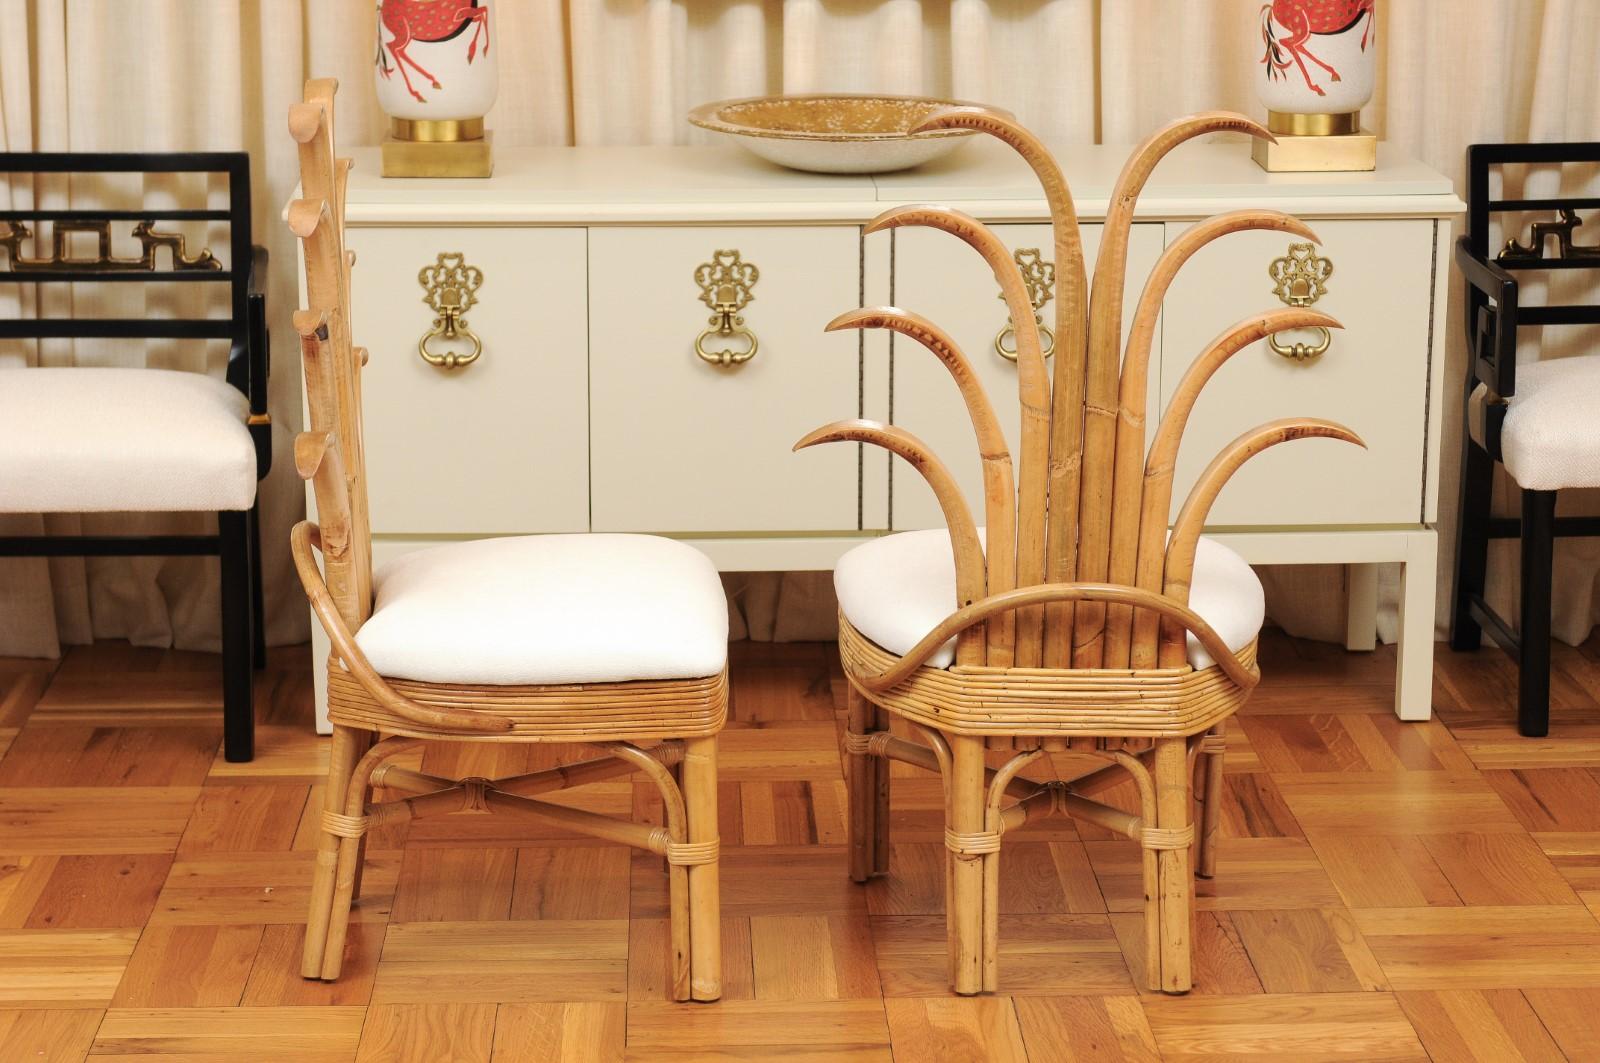 Exquisite Set of 12 Rattan and Cane Palm Frond Dining Chairs, circa 1950 For Sale 3